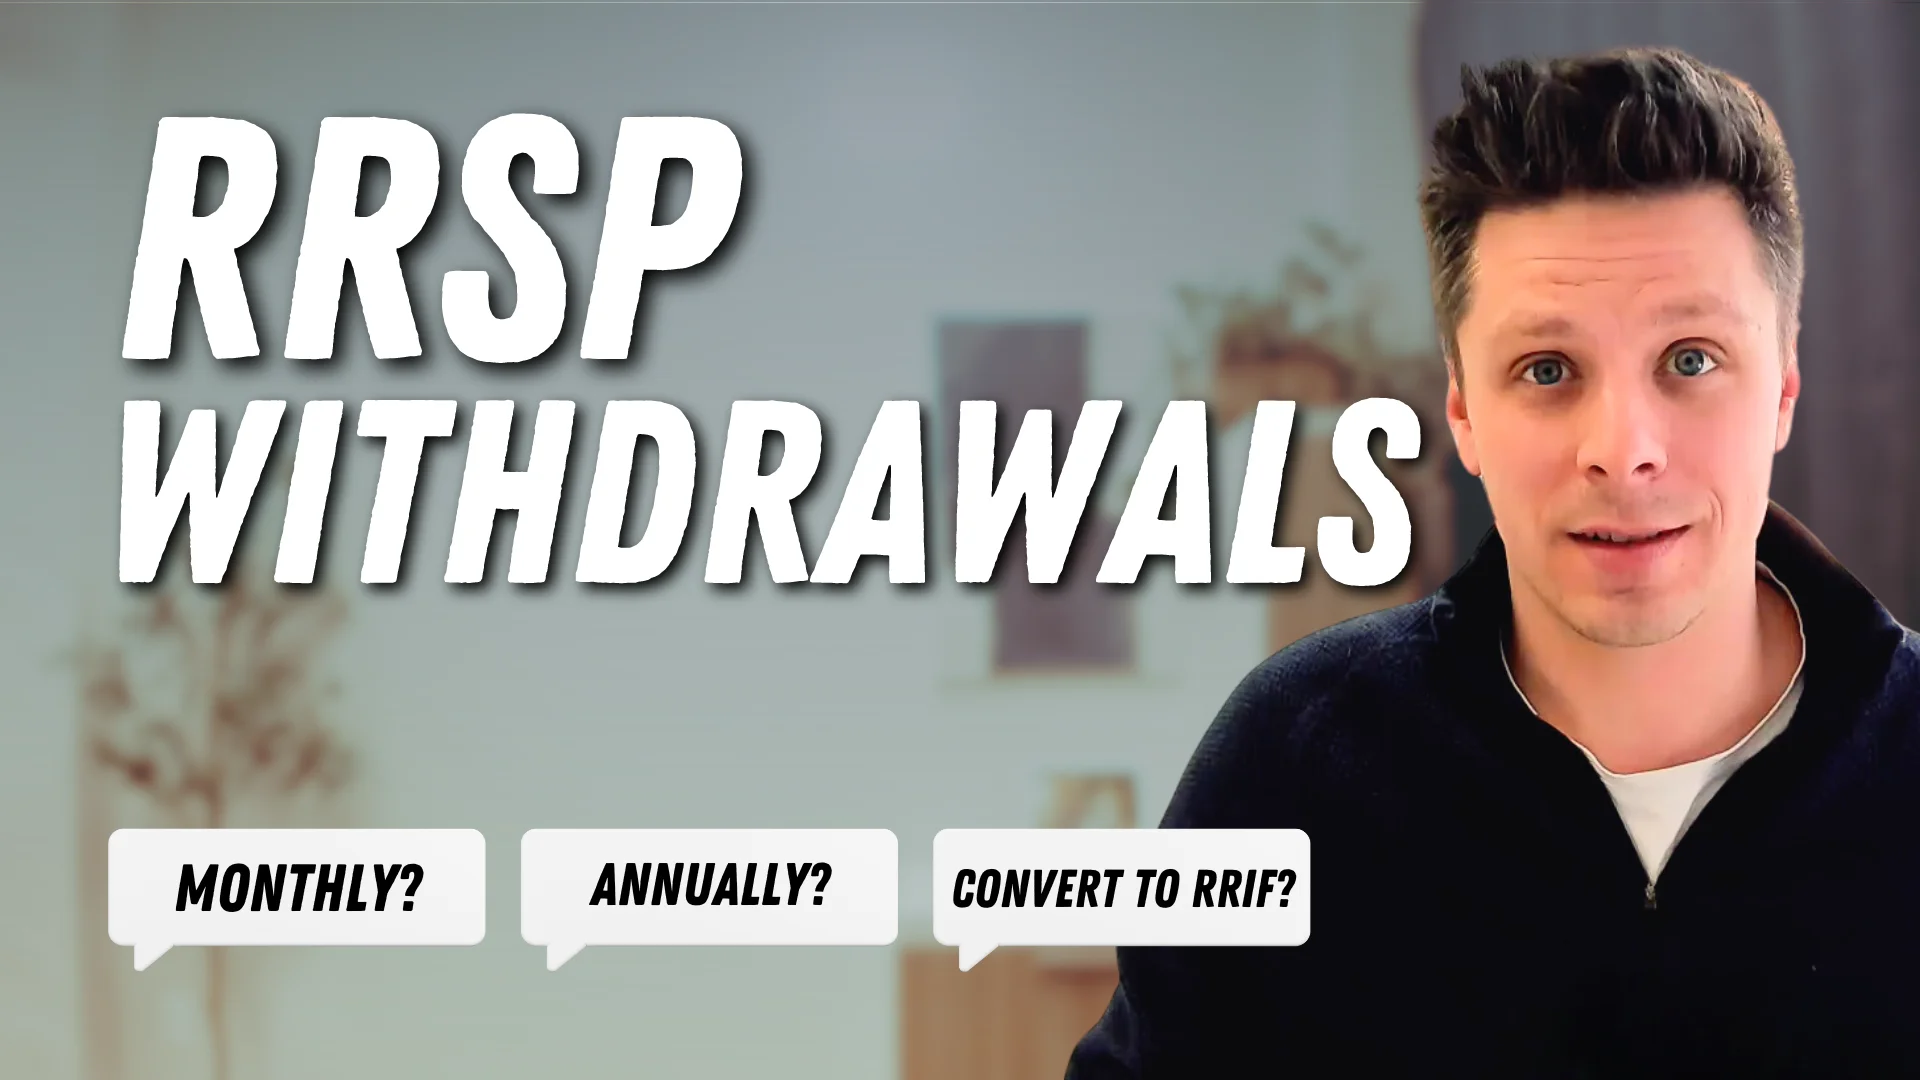 How Often Should You Make RRSP Withdrawals?